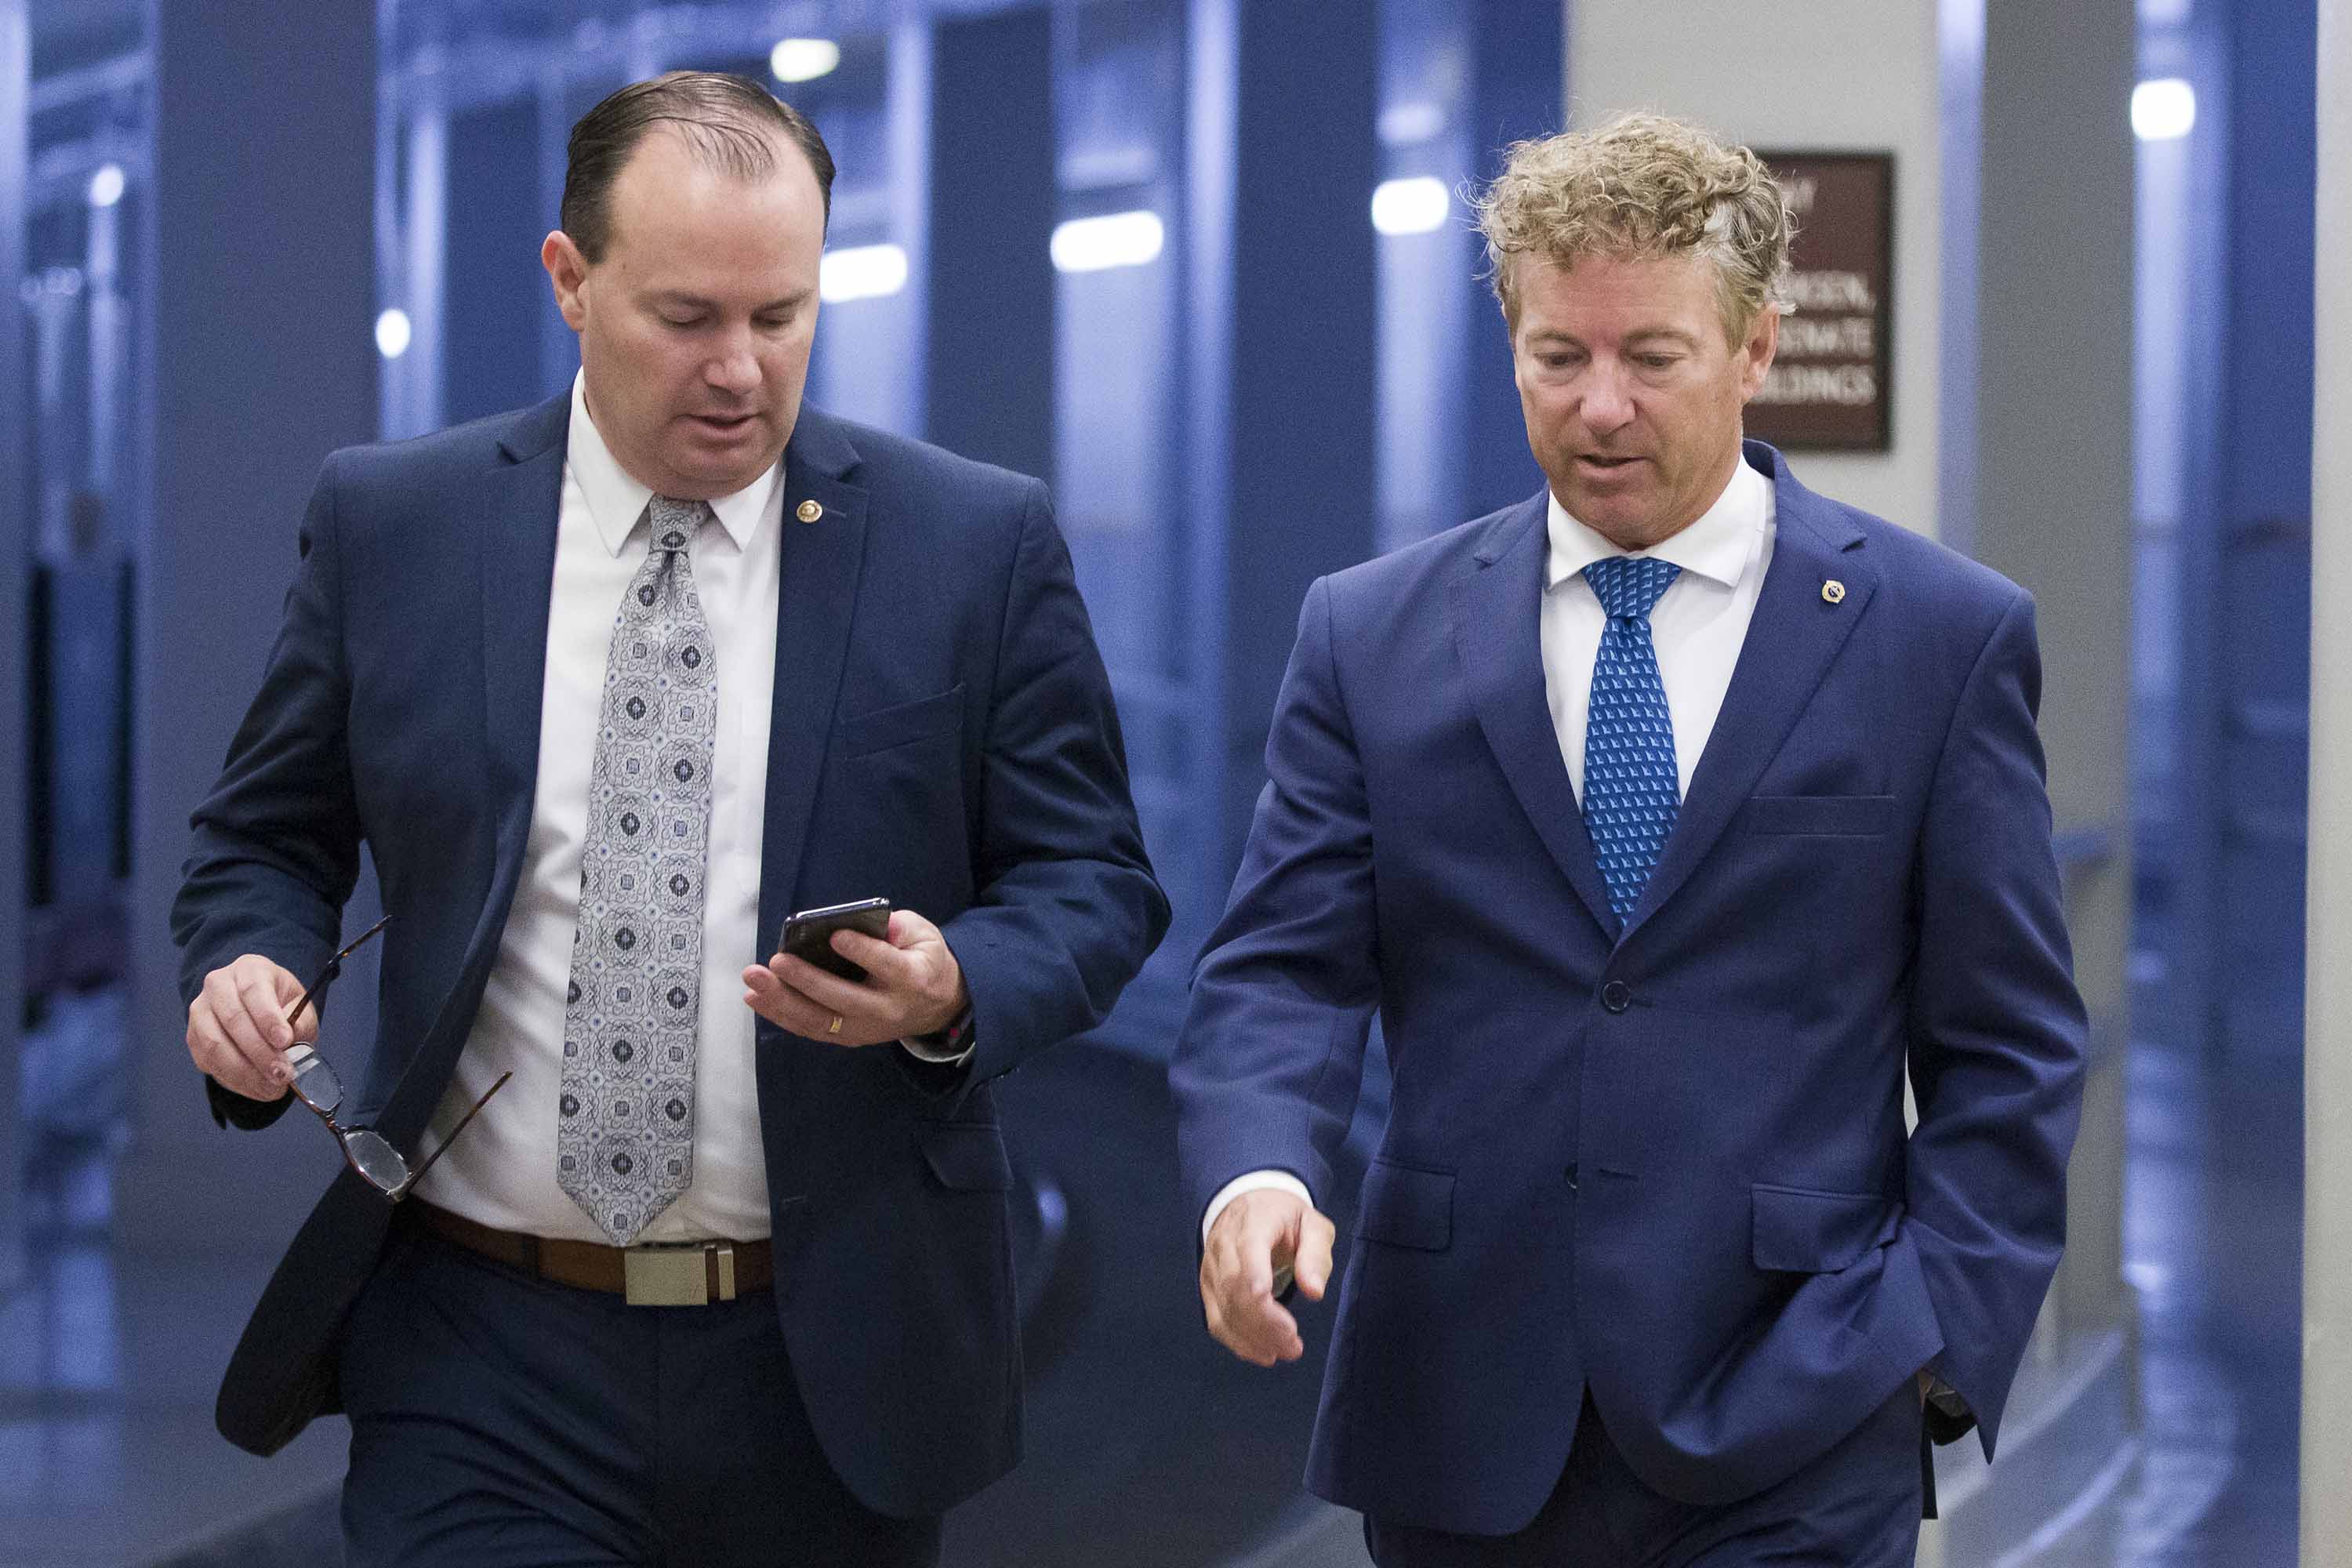 Senators Mike Lee and Rand Paul walk to a vote on Capitol Hill in June 2019.